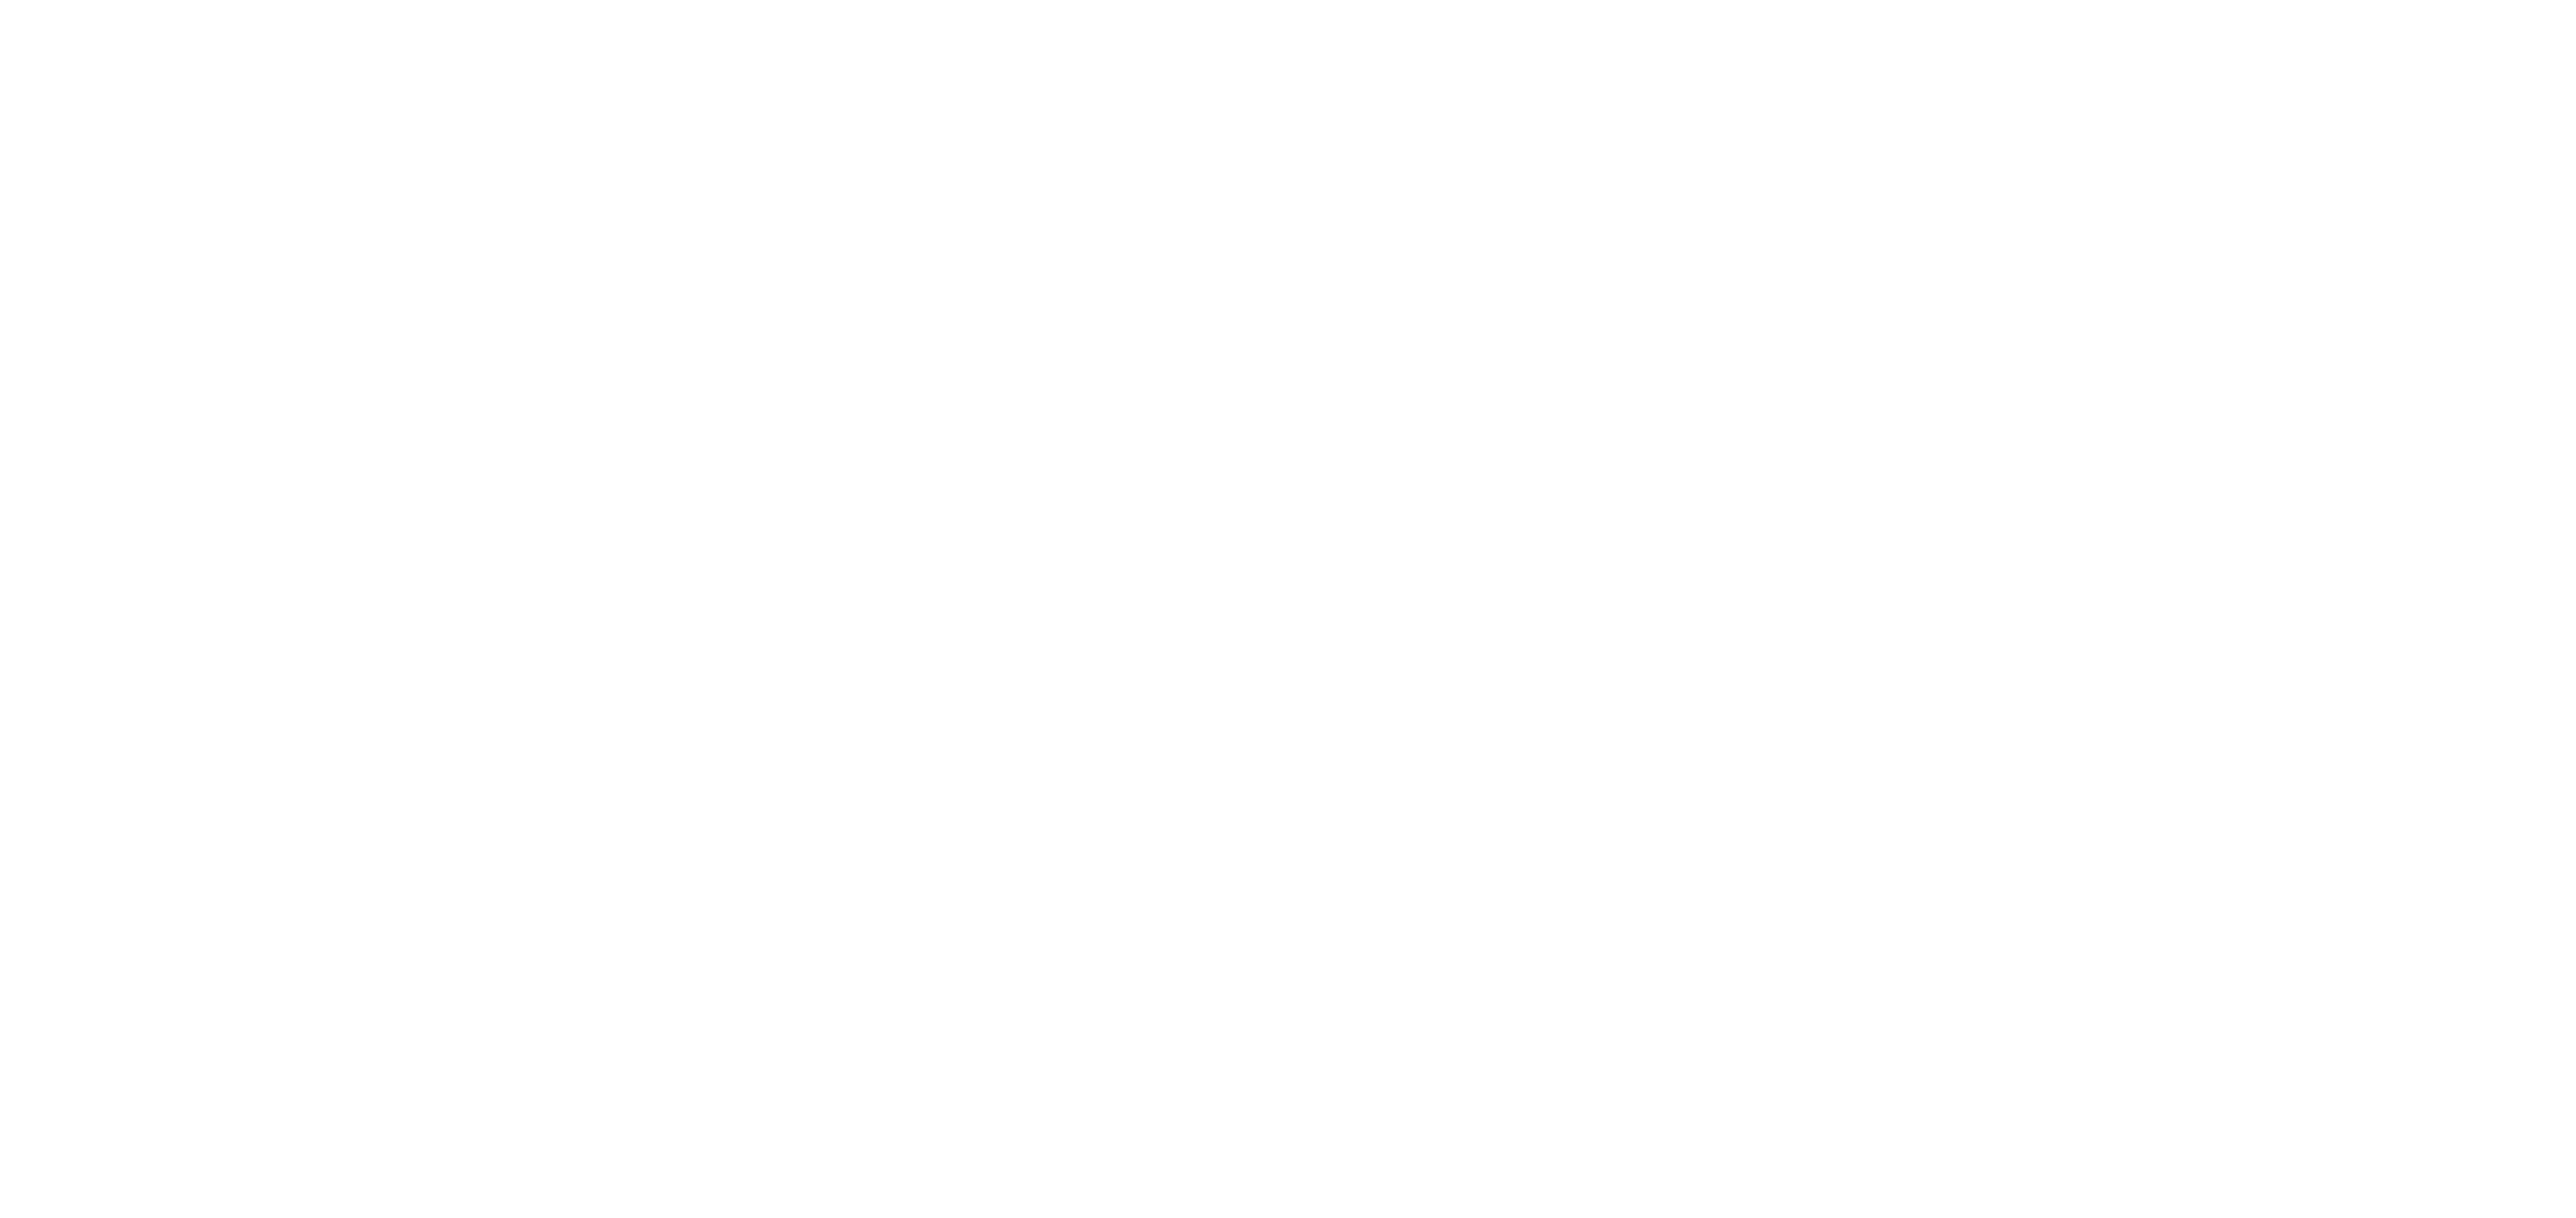 Pace Law logo